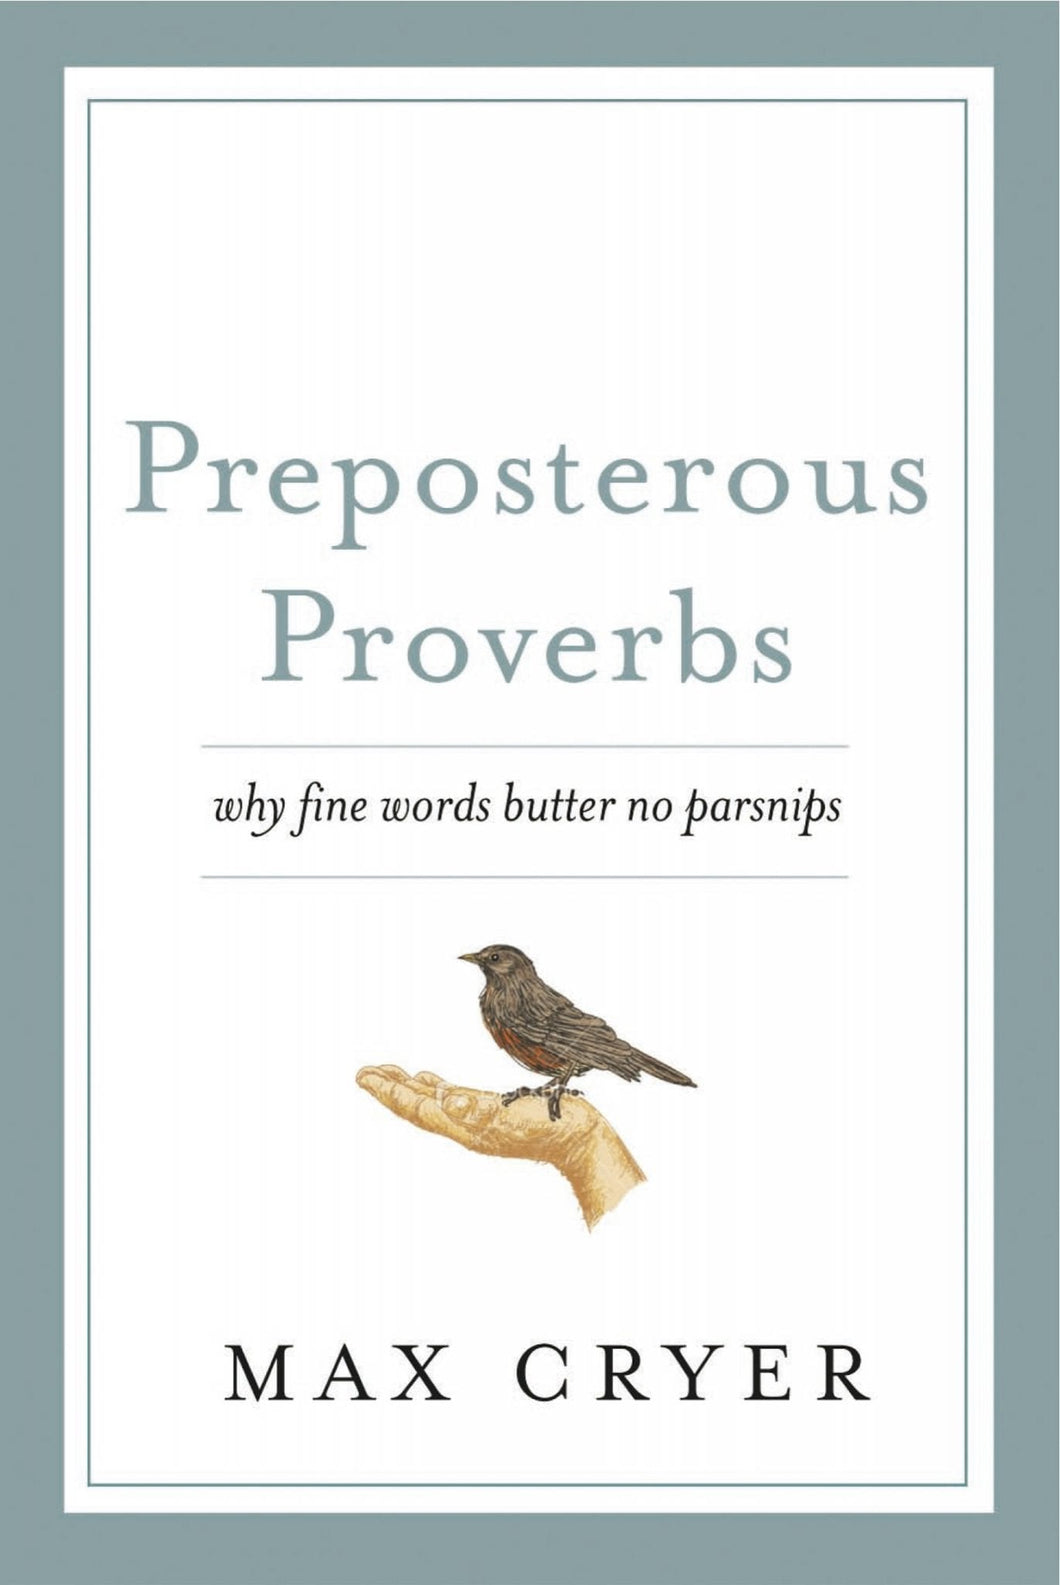 Preposterous Proverbs by Max Cryer: stock image of front cover.